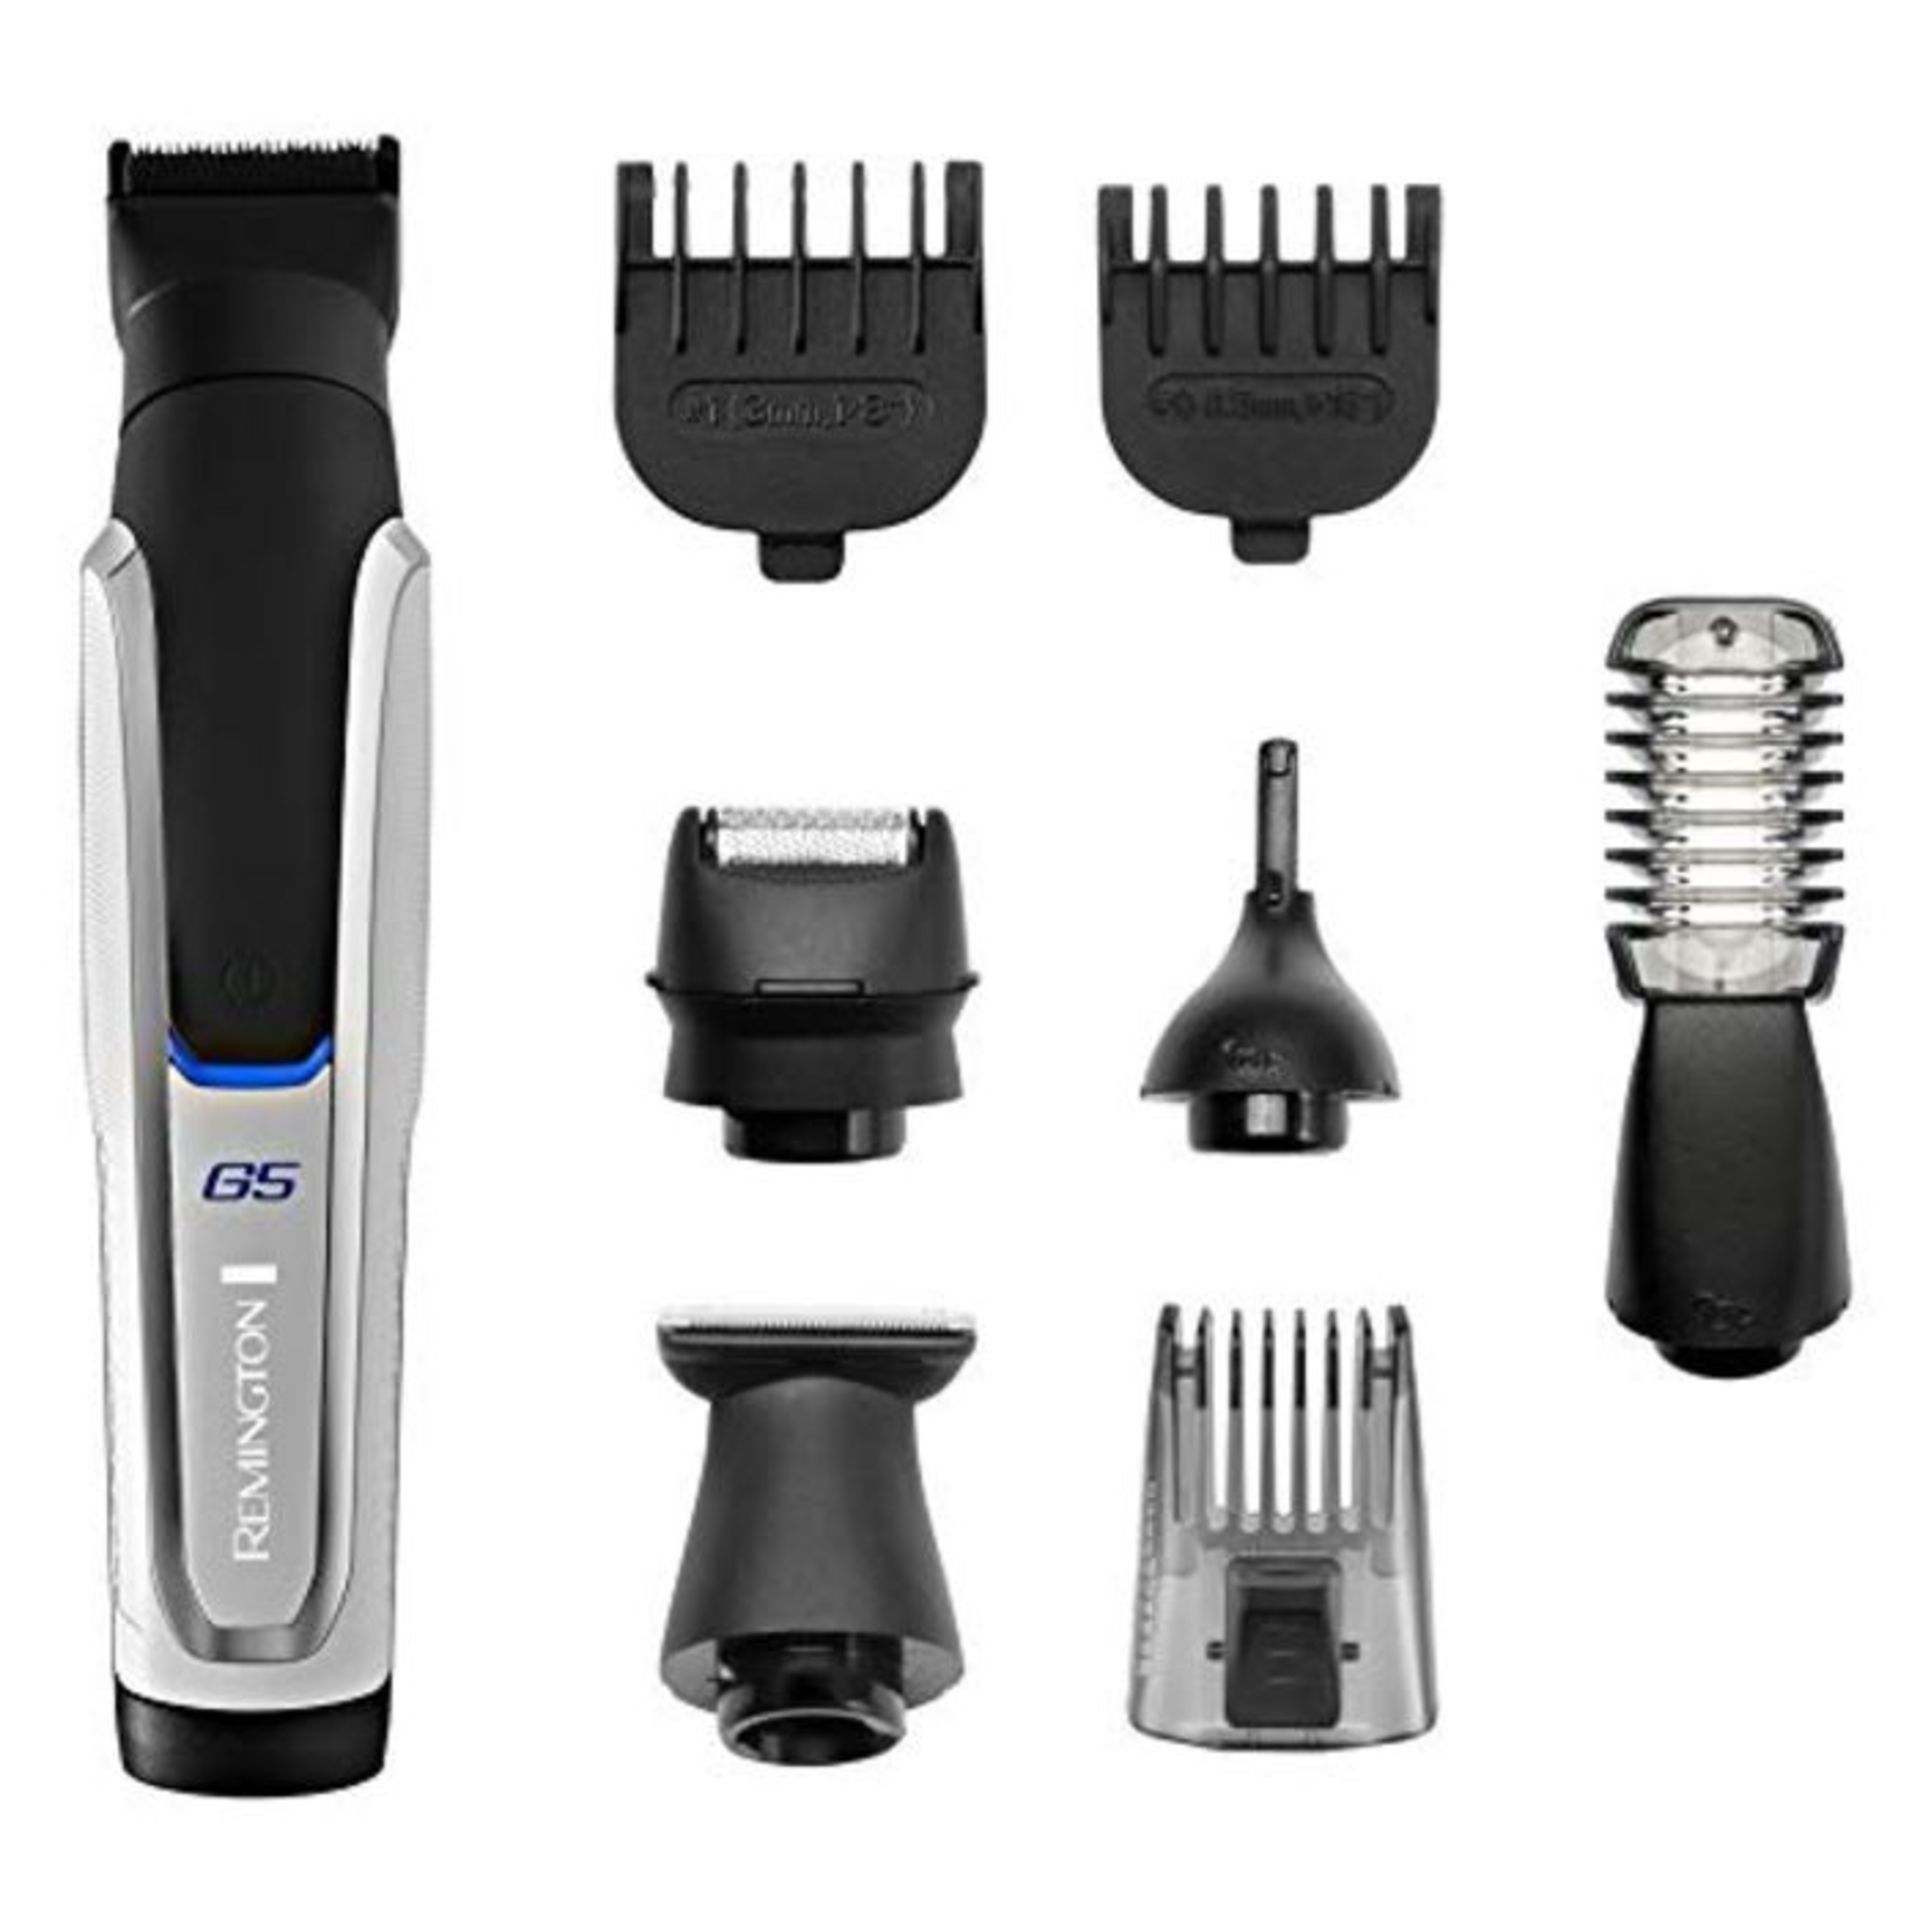 Remington Graphite G5 Mens Electric Trimmer, All-in-One Male Grooming Kit for Beard, B